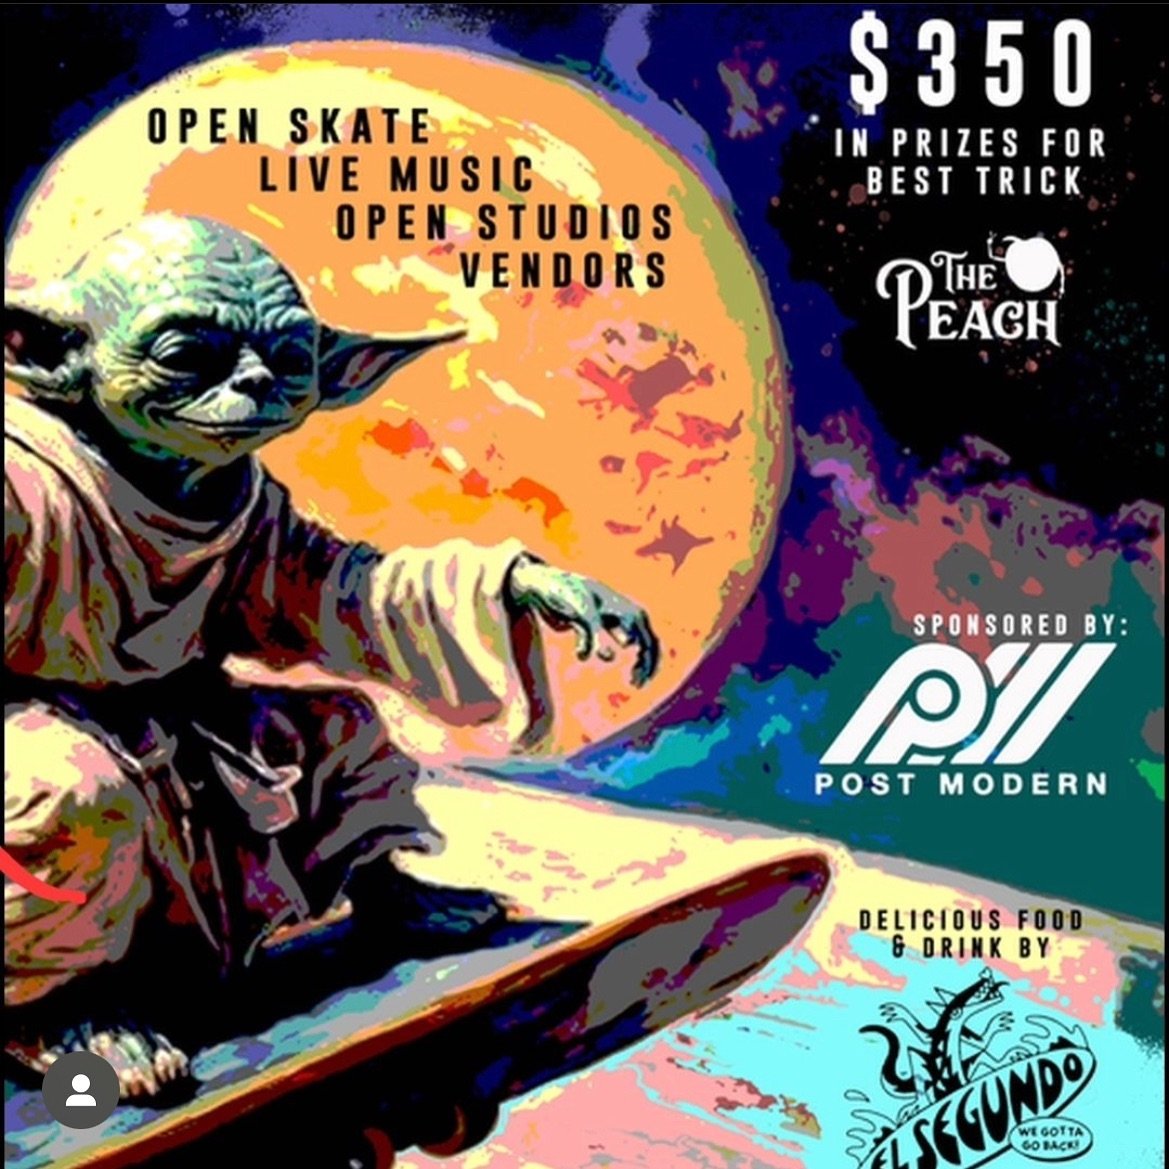 This SATURDAY May 4th, come visit our booth at The Peach in West Palm Beach for the Skate Jedi Art Walk!!
We will have original art and prints available for sale, merch, and other swag!
Sat May 4th 5-10pm

@darktidetattoo @googieboogies @big_cheets @